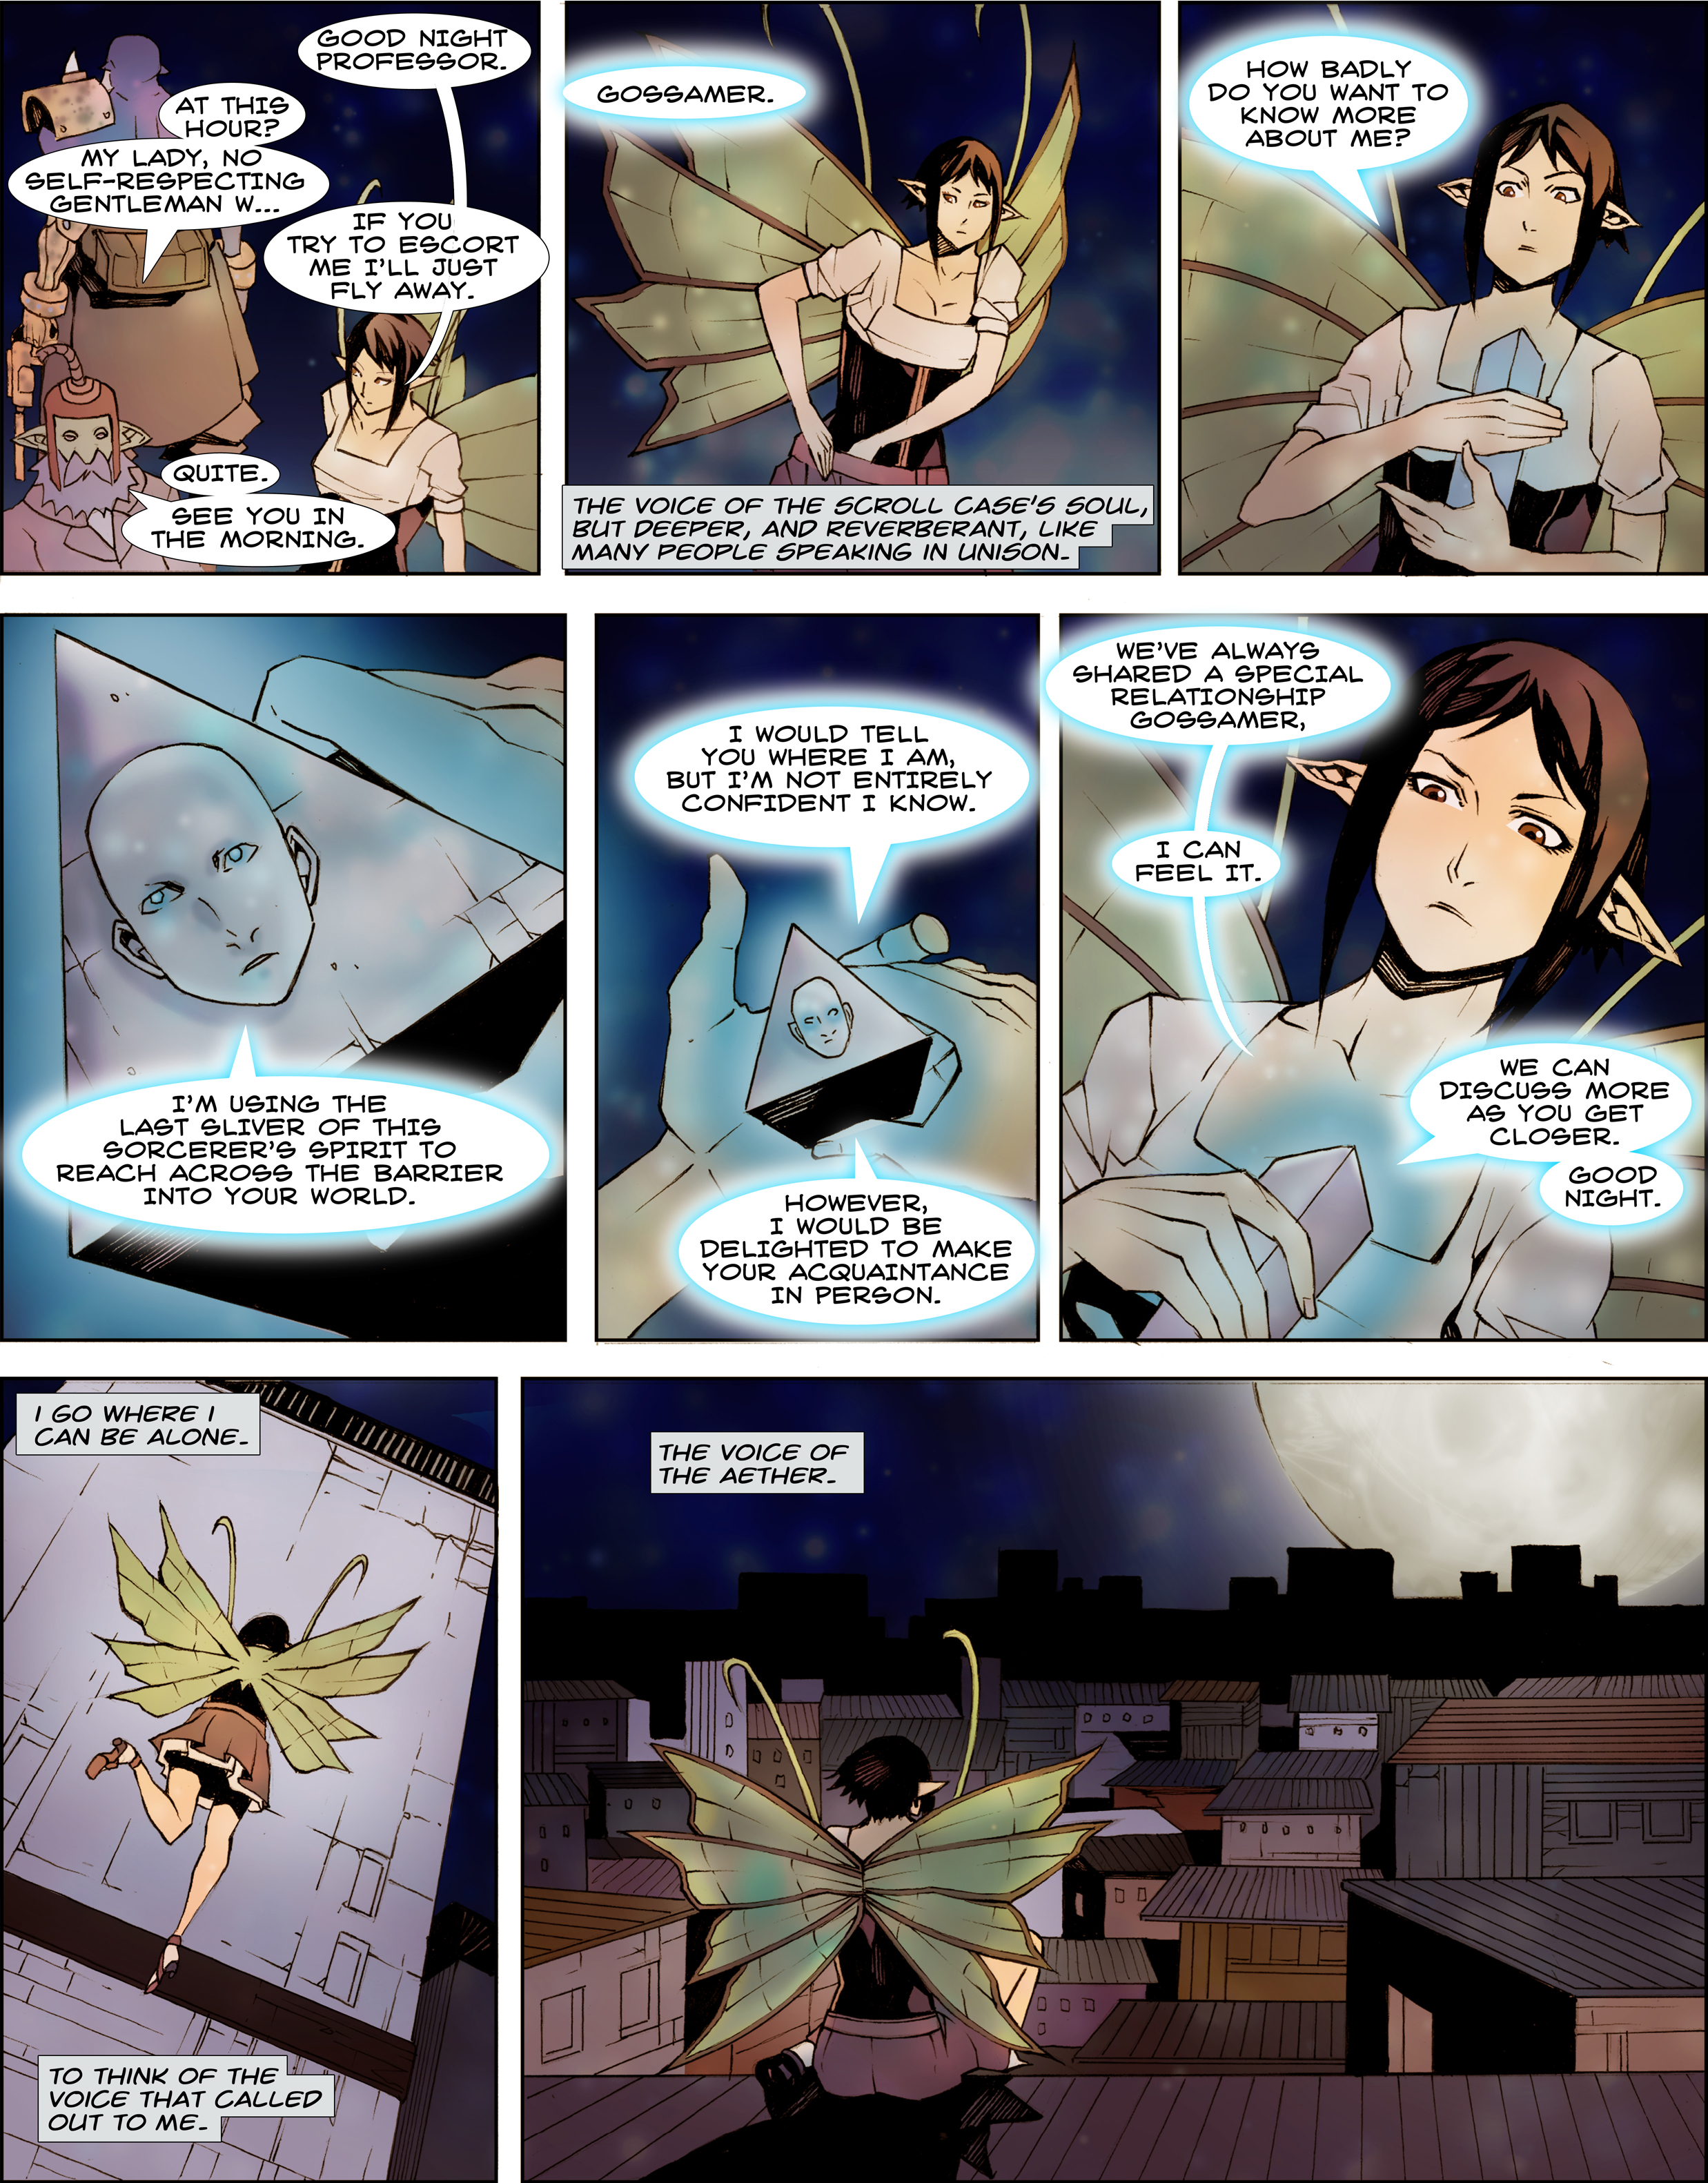 Chapter 7, Page 10